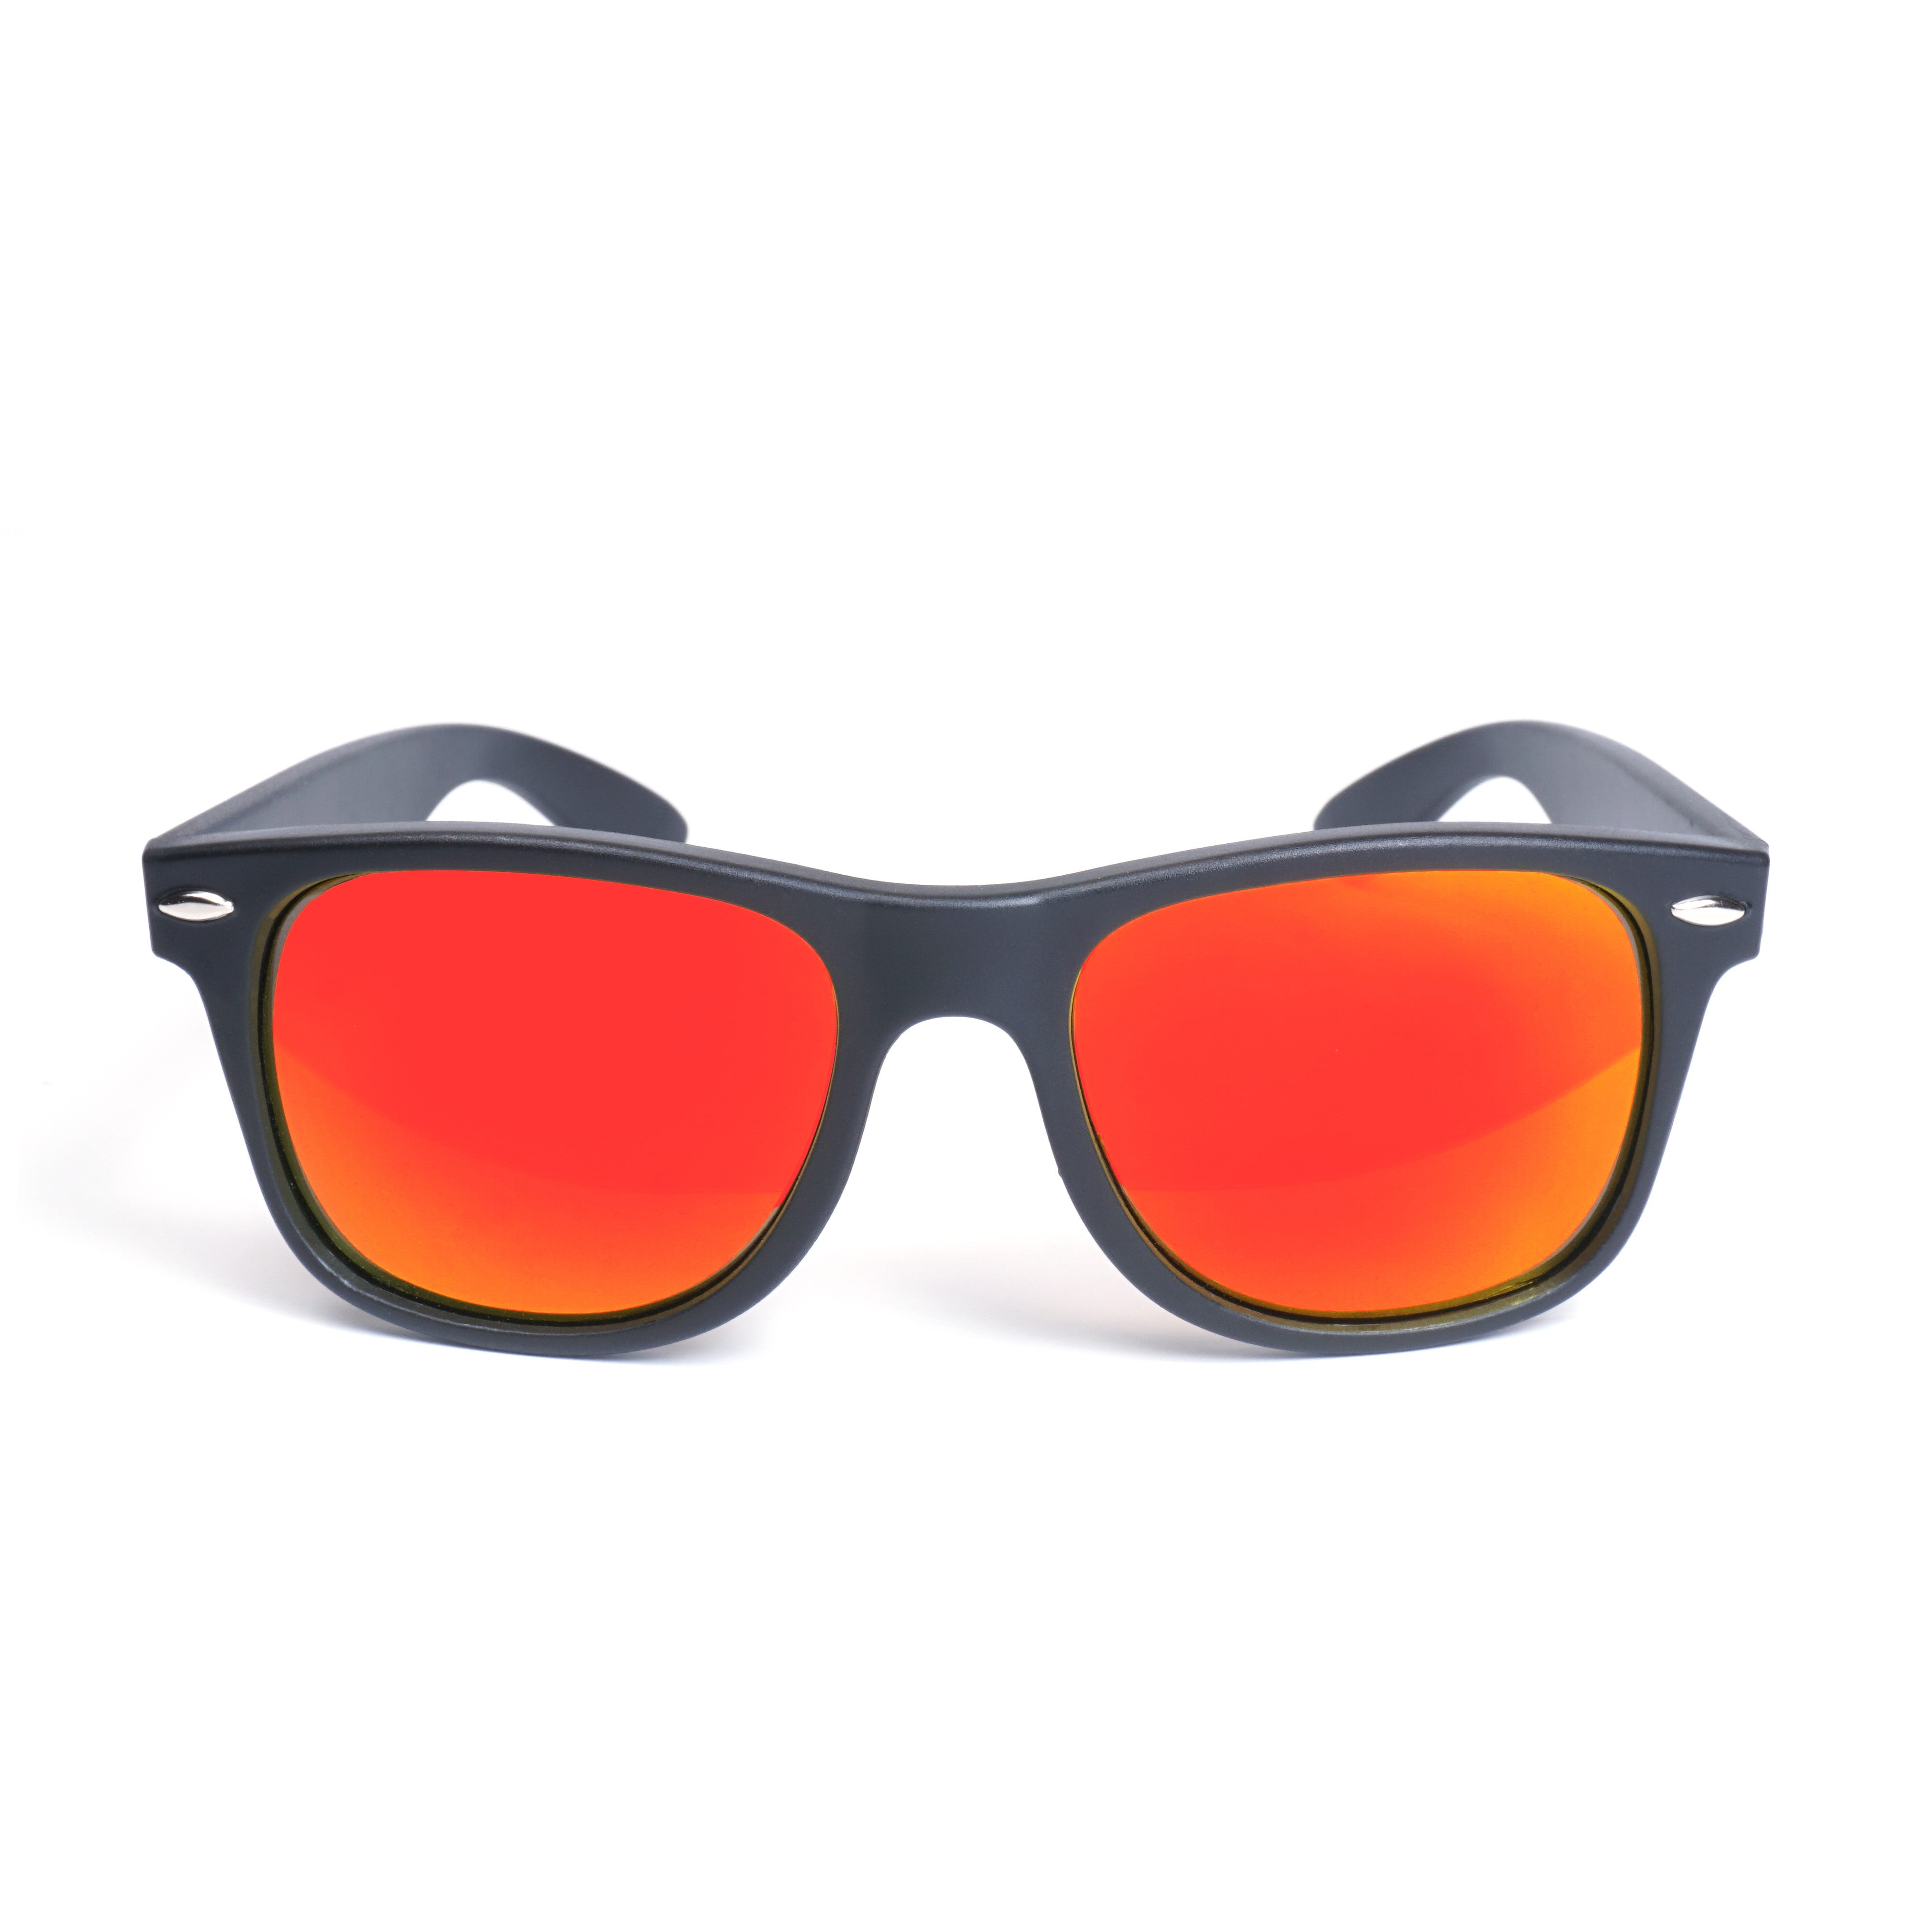 STAGE Rebel Floating Sunglasses with Revo Lenses, UV400 Protection, Polarized Lenses, & Float in Water